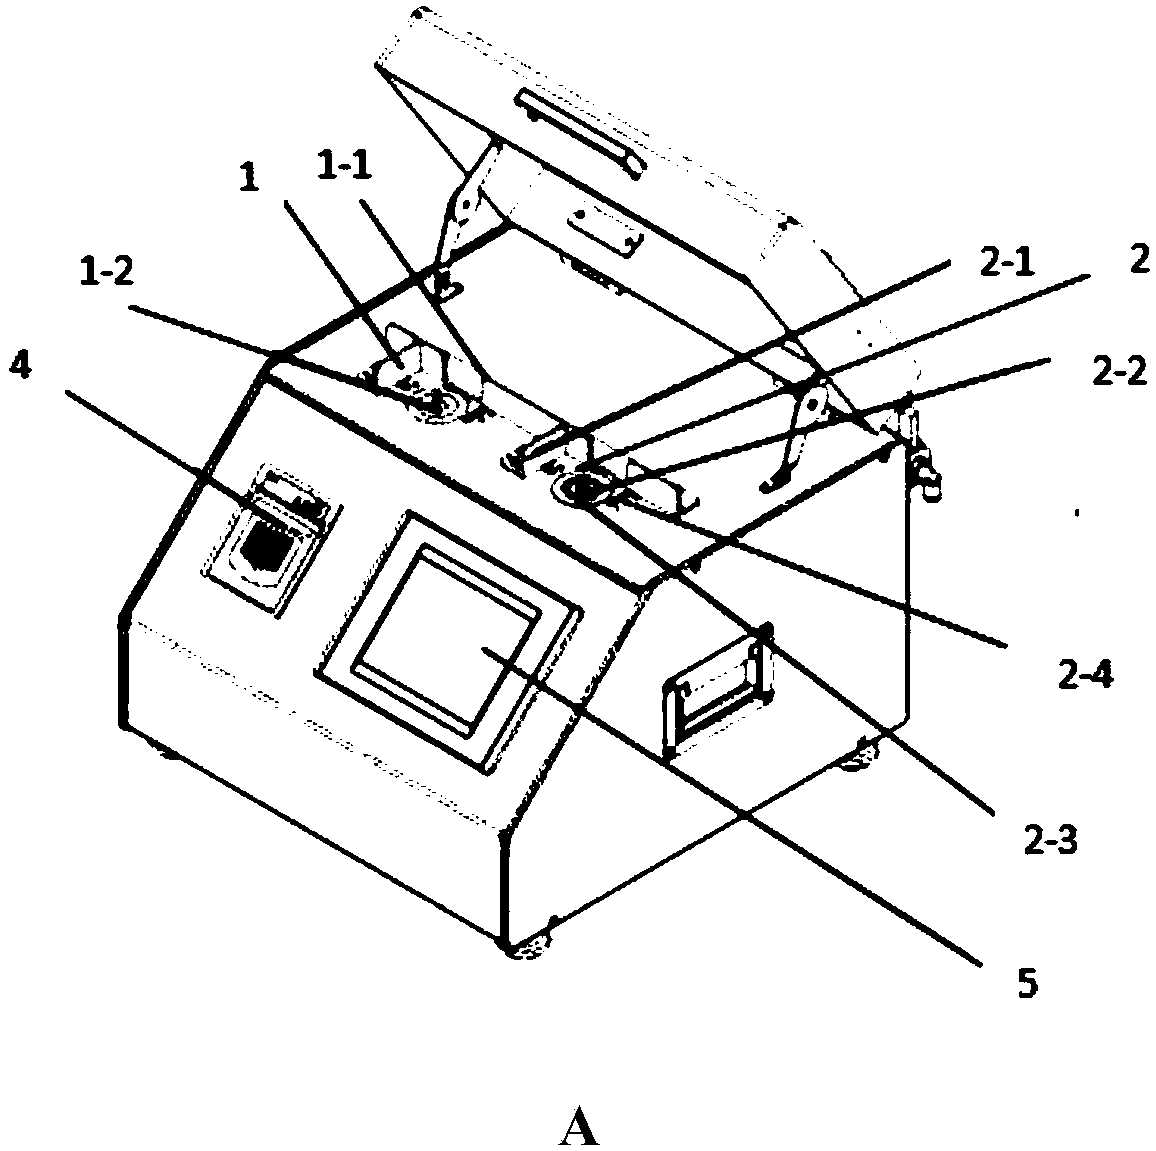 Cigarette package sealing degree detection device